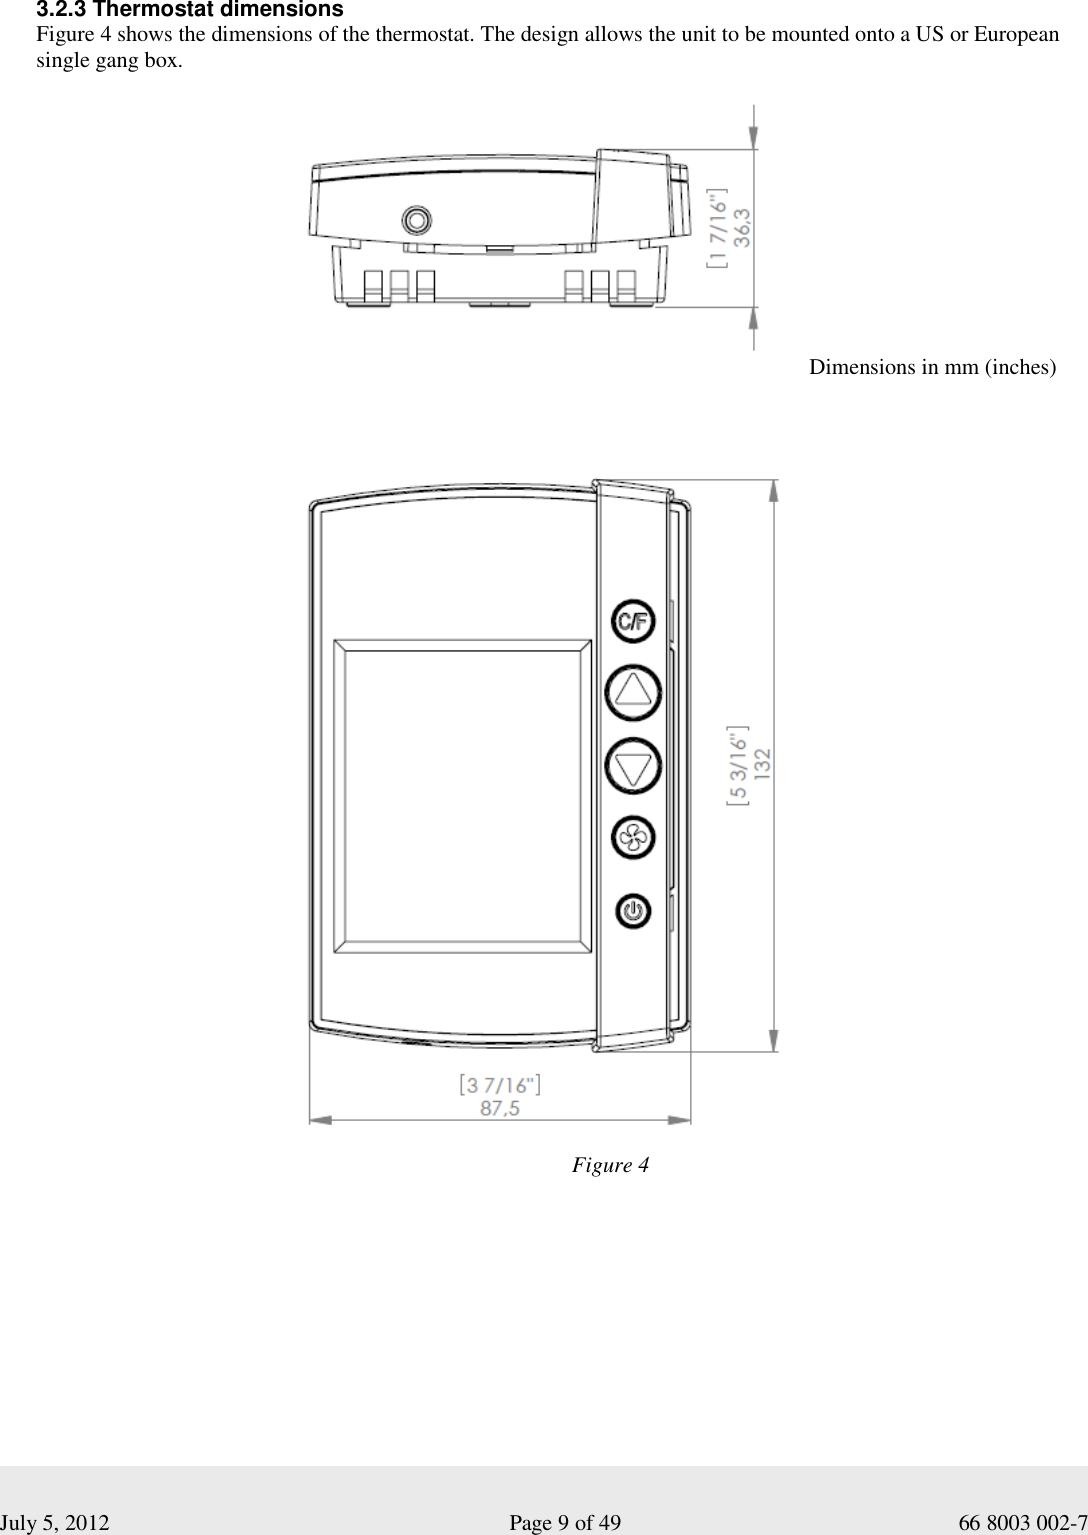  July 5, 2012                                                              Page 9 of 49                                           66 8003 002-7  3.2.3 Thermostat dimensions Figure 4 shows the dimensions of the thermostat. The design allows the unit to be mounted onto a US or European single gang box.   Dimensions in mm (inches) Figure 4 